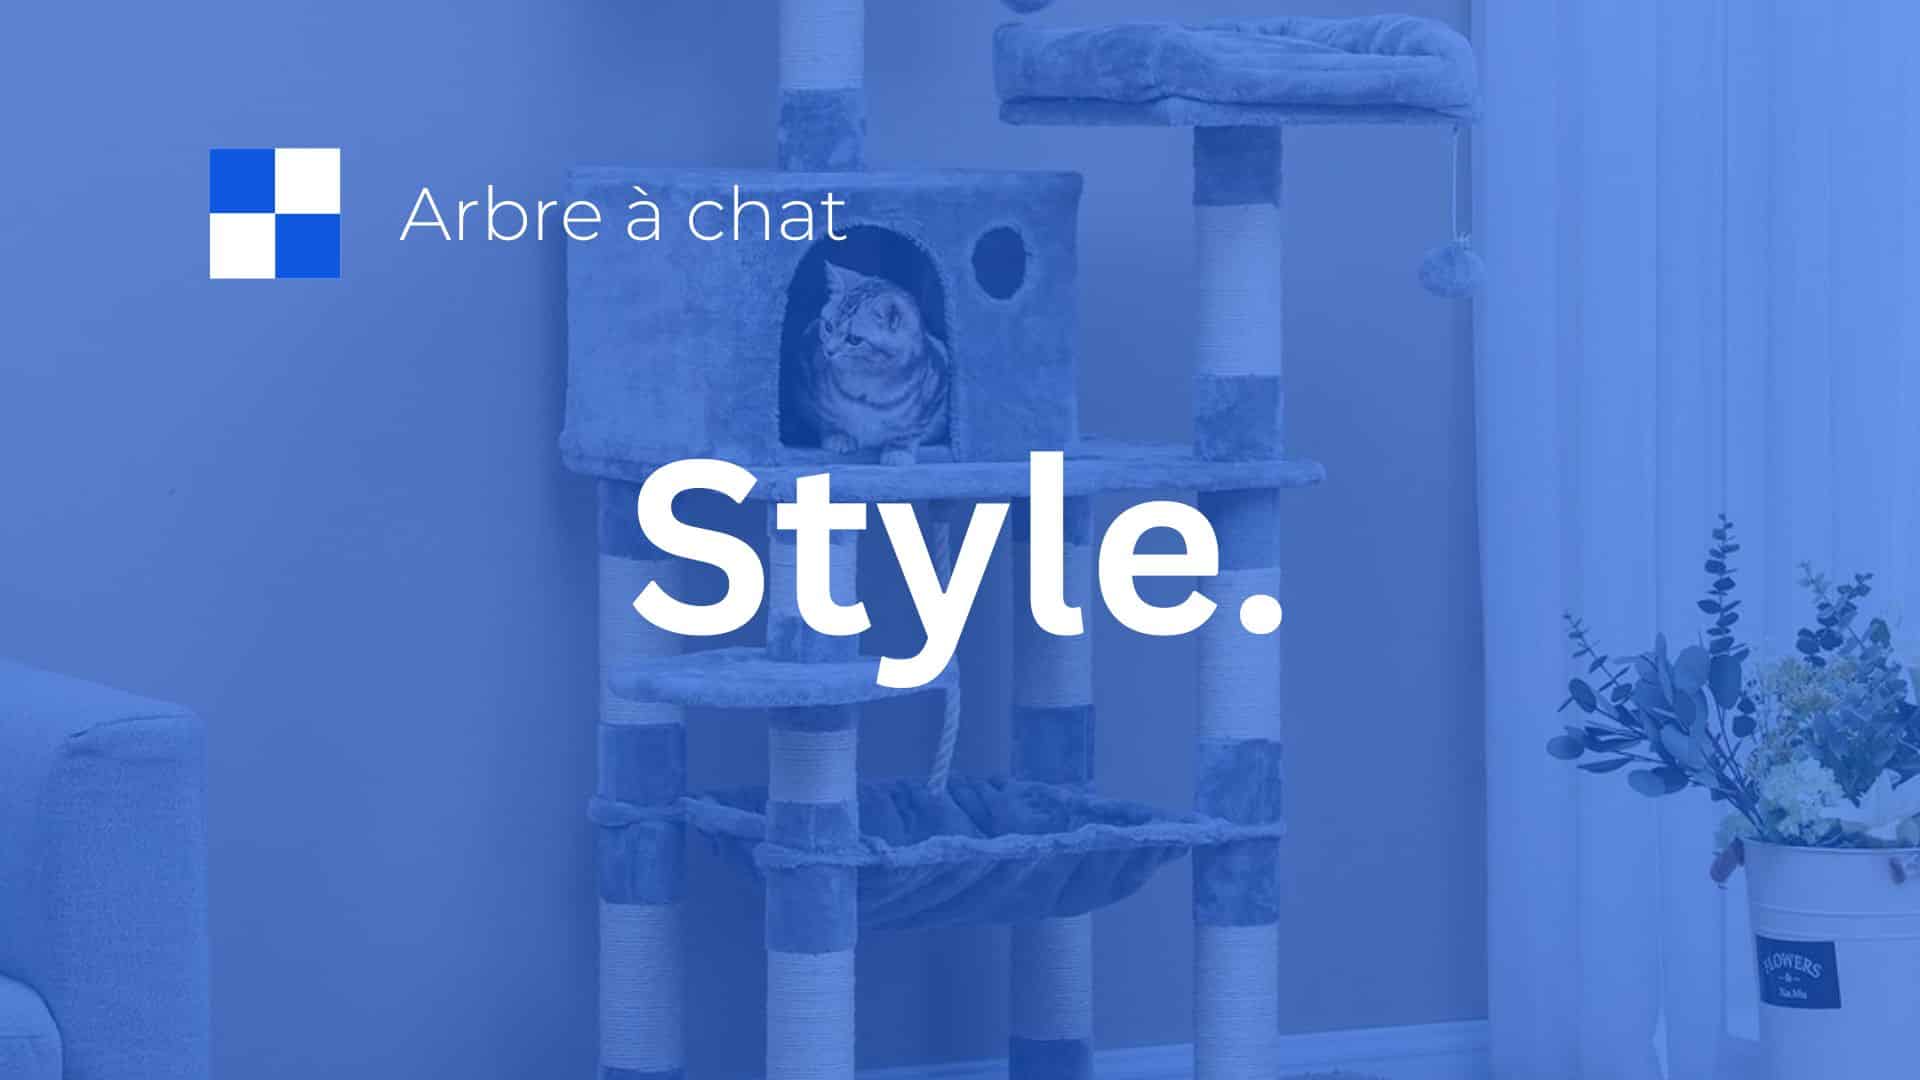 arbre a chat style